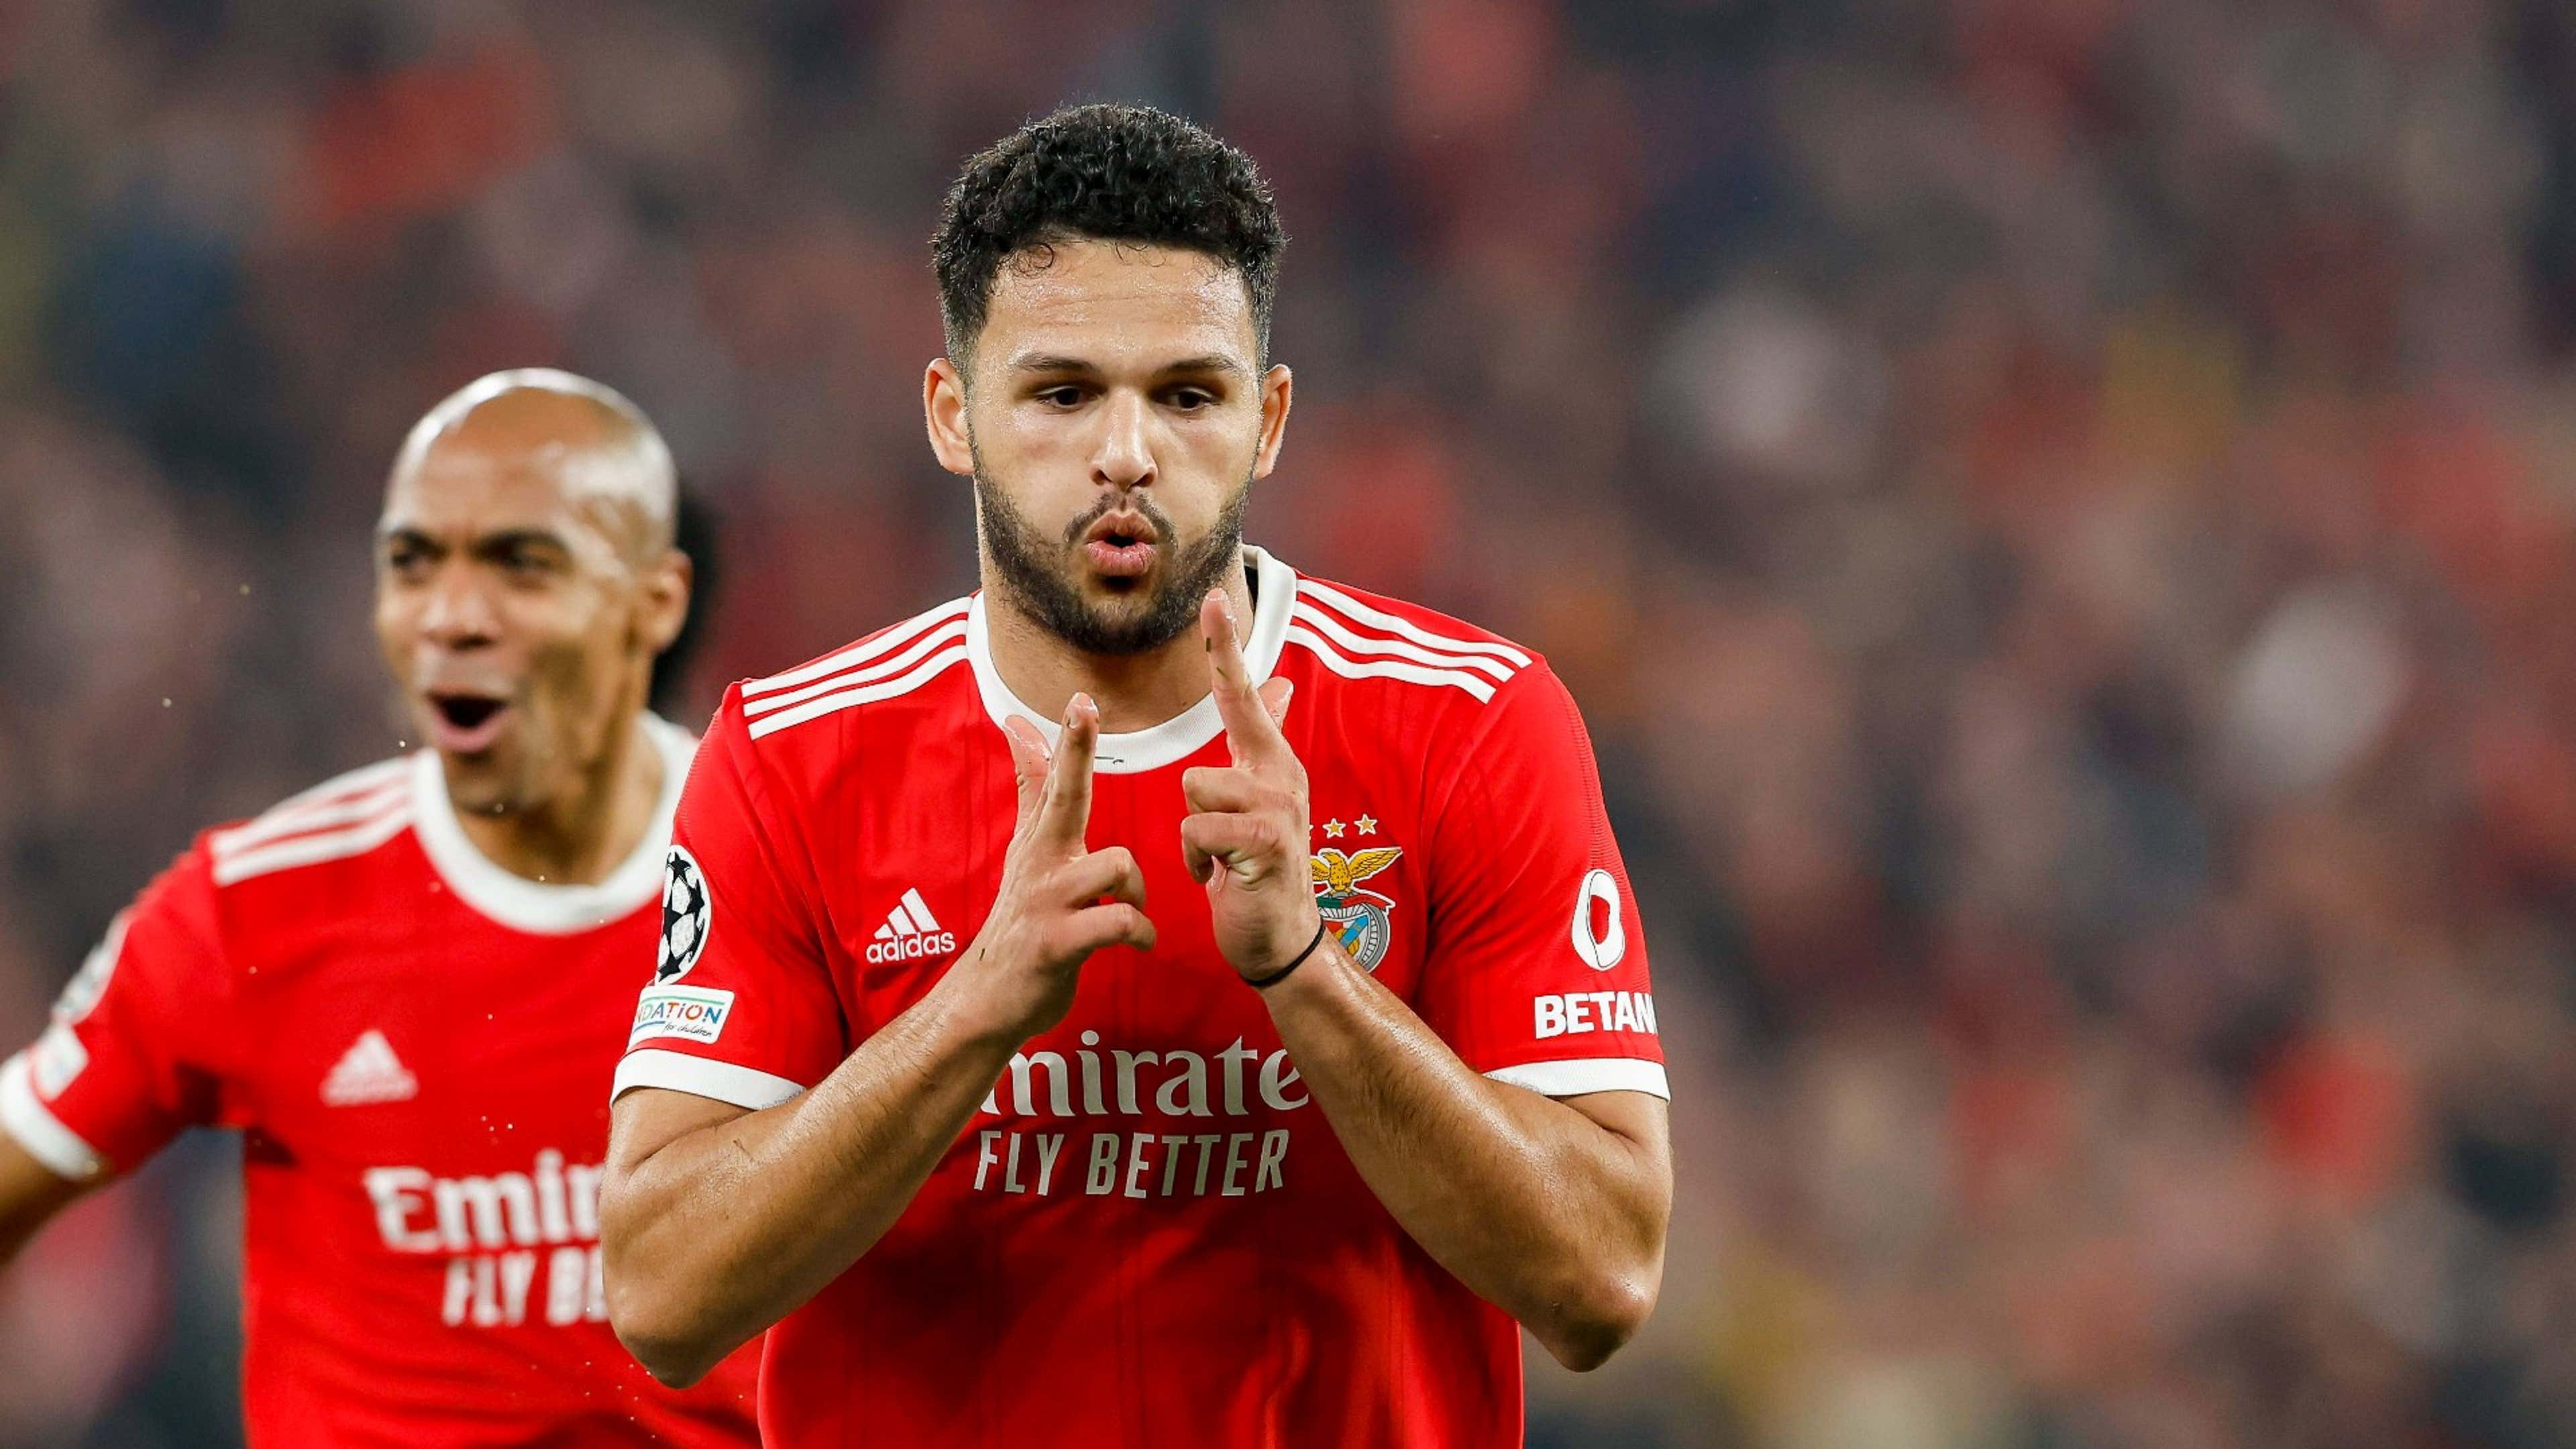 Kylian Mbappe replacement secured? PSG agree €80m Goncalo Ramos deal with medical booked in for Benfica striker | Goal.com